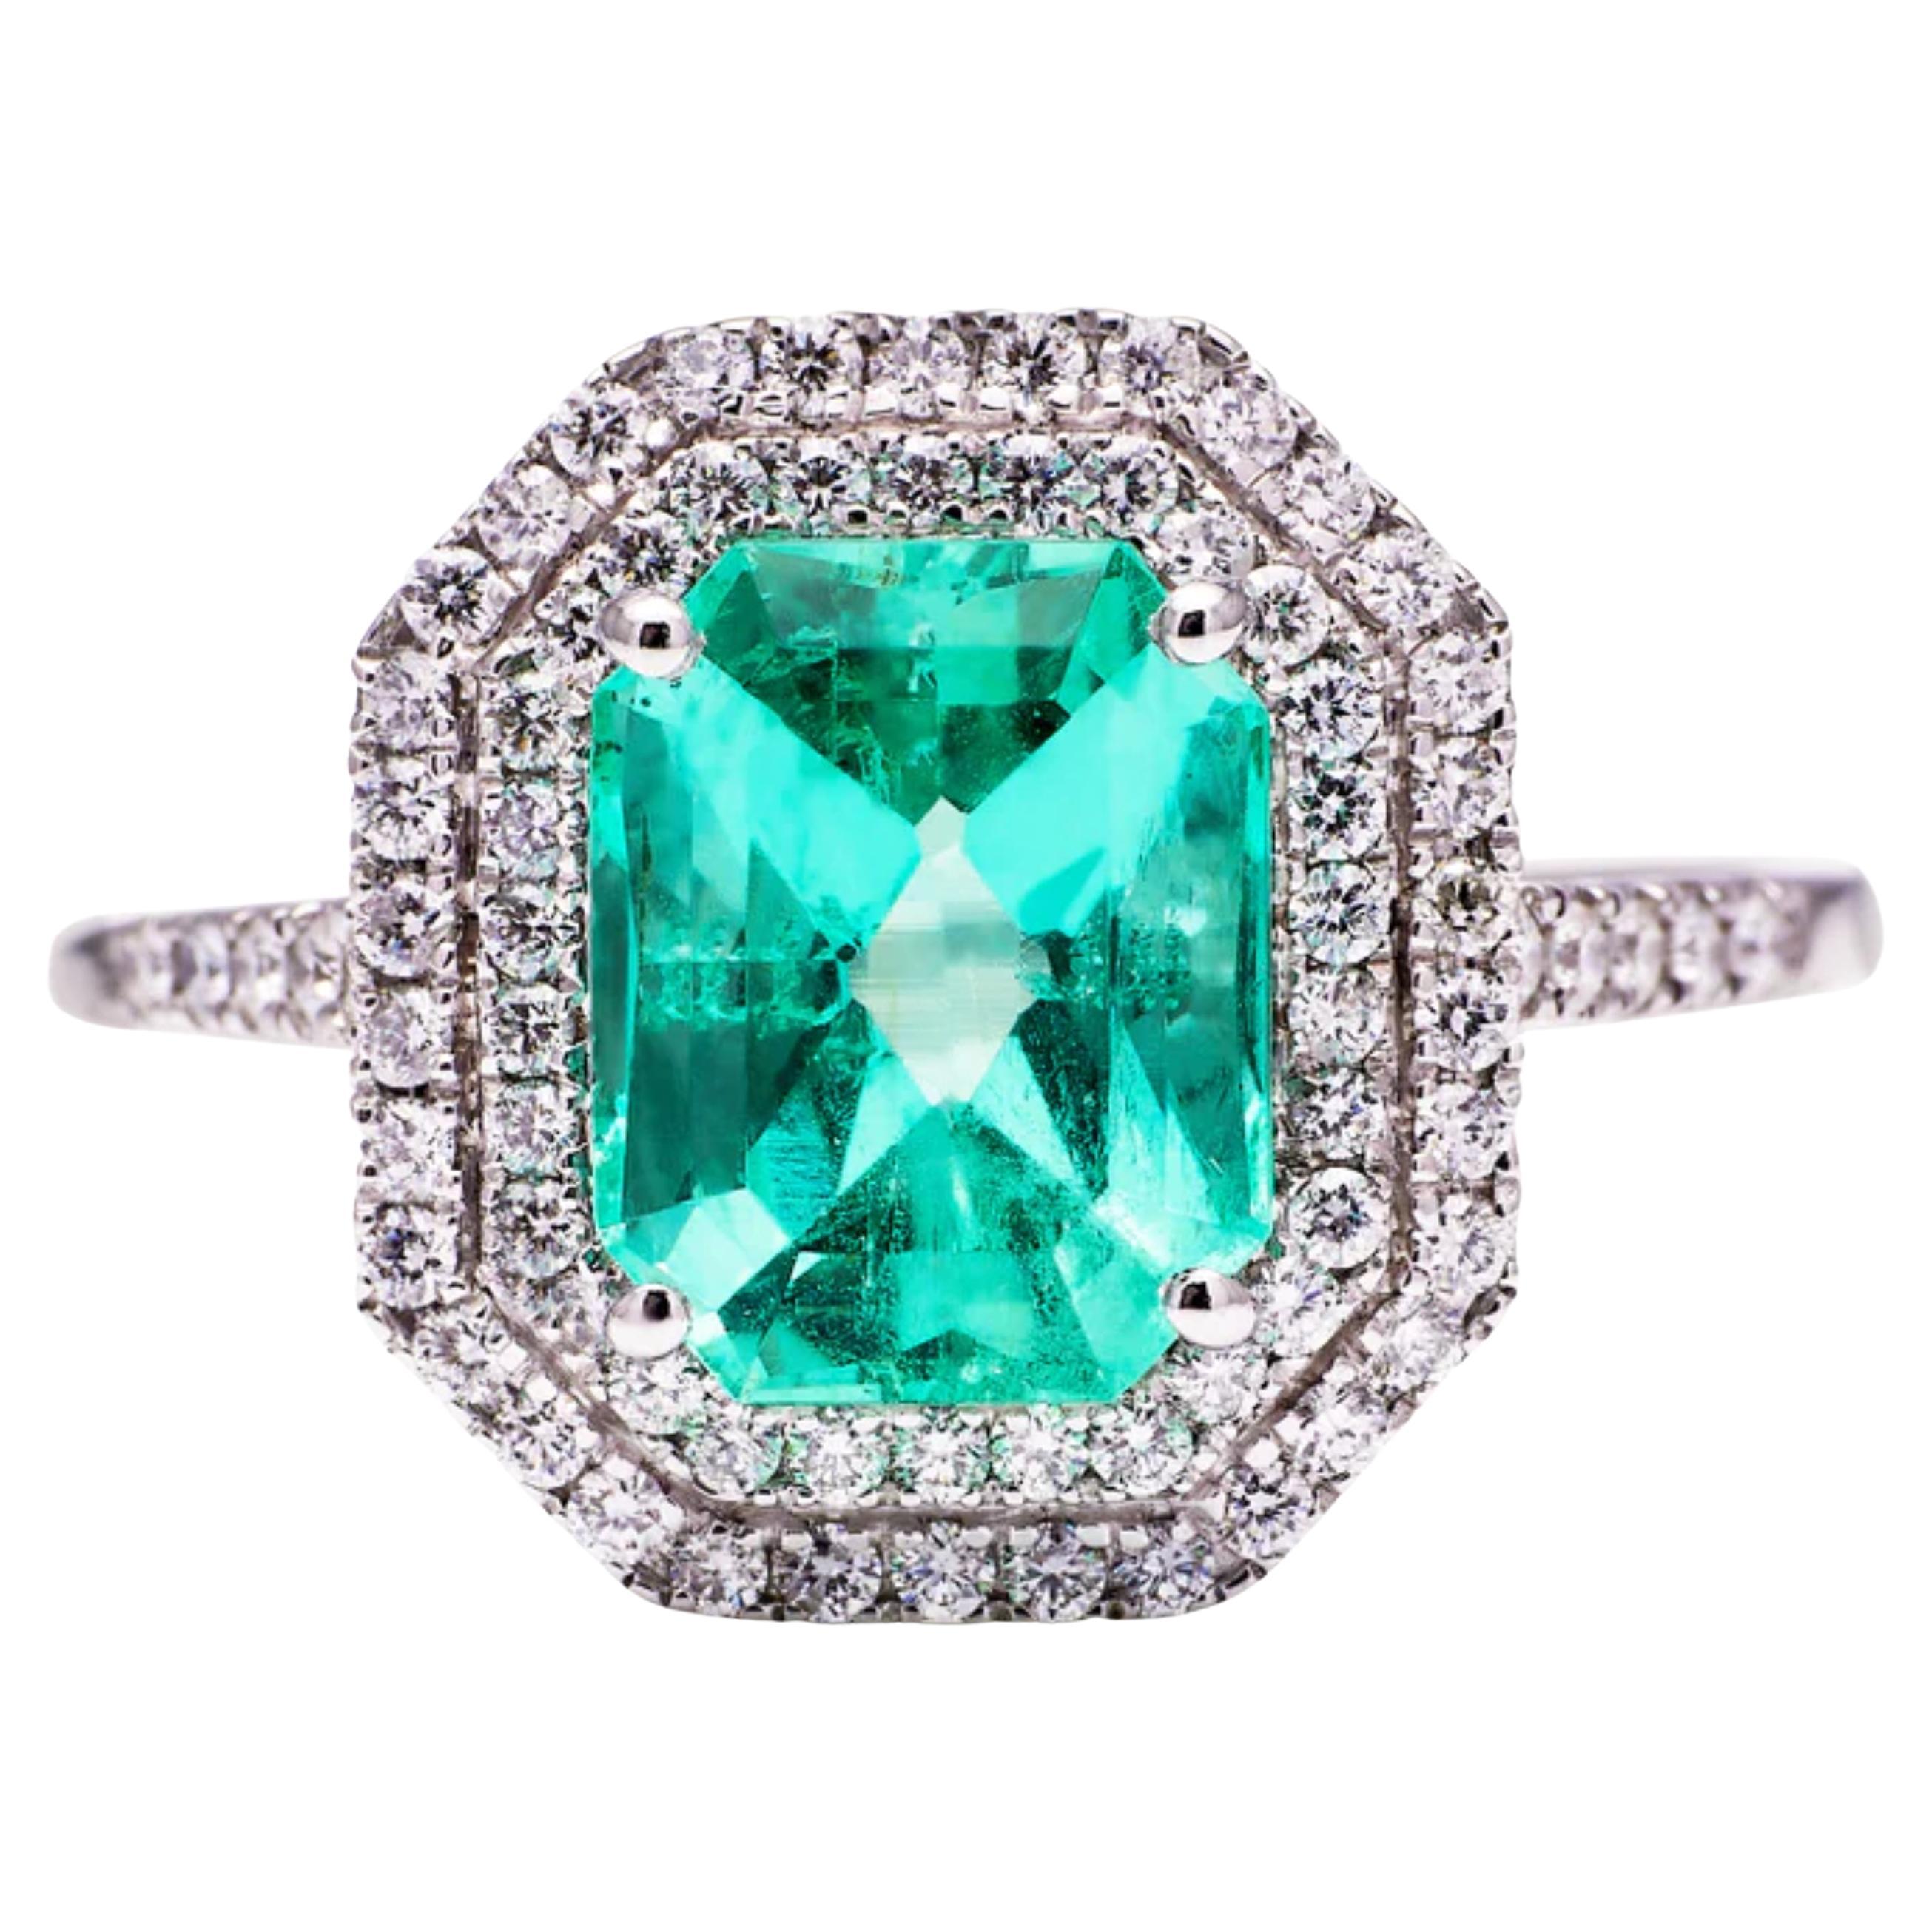 2.50 Carat Colombian Emerald Diamond Engagement Ring Halo Emerald Cocktail Ring For Sale